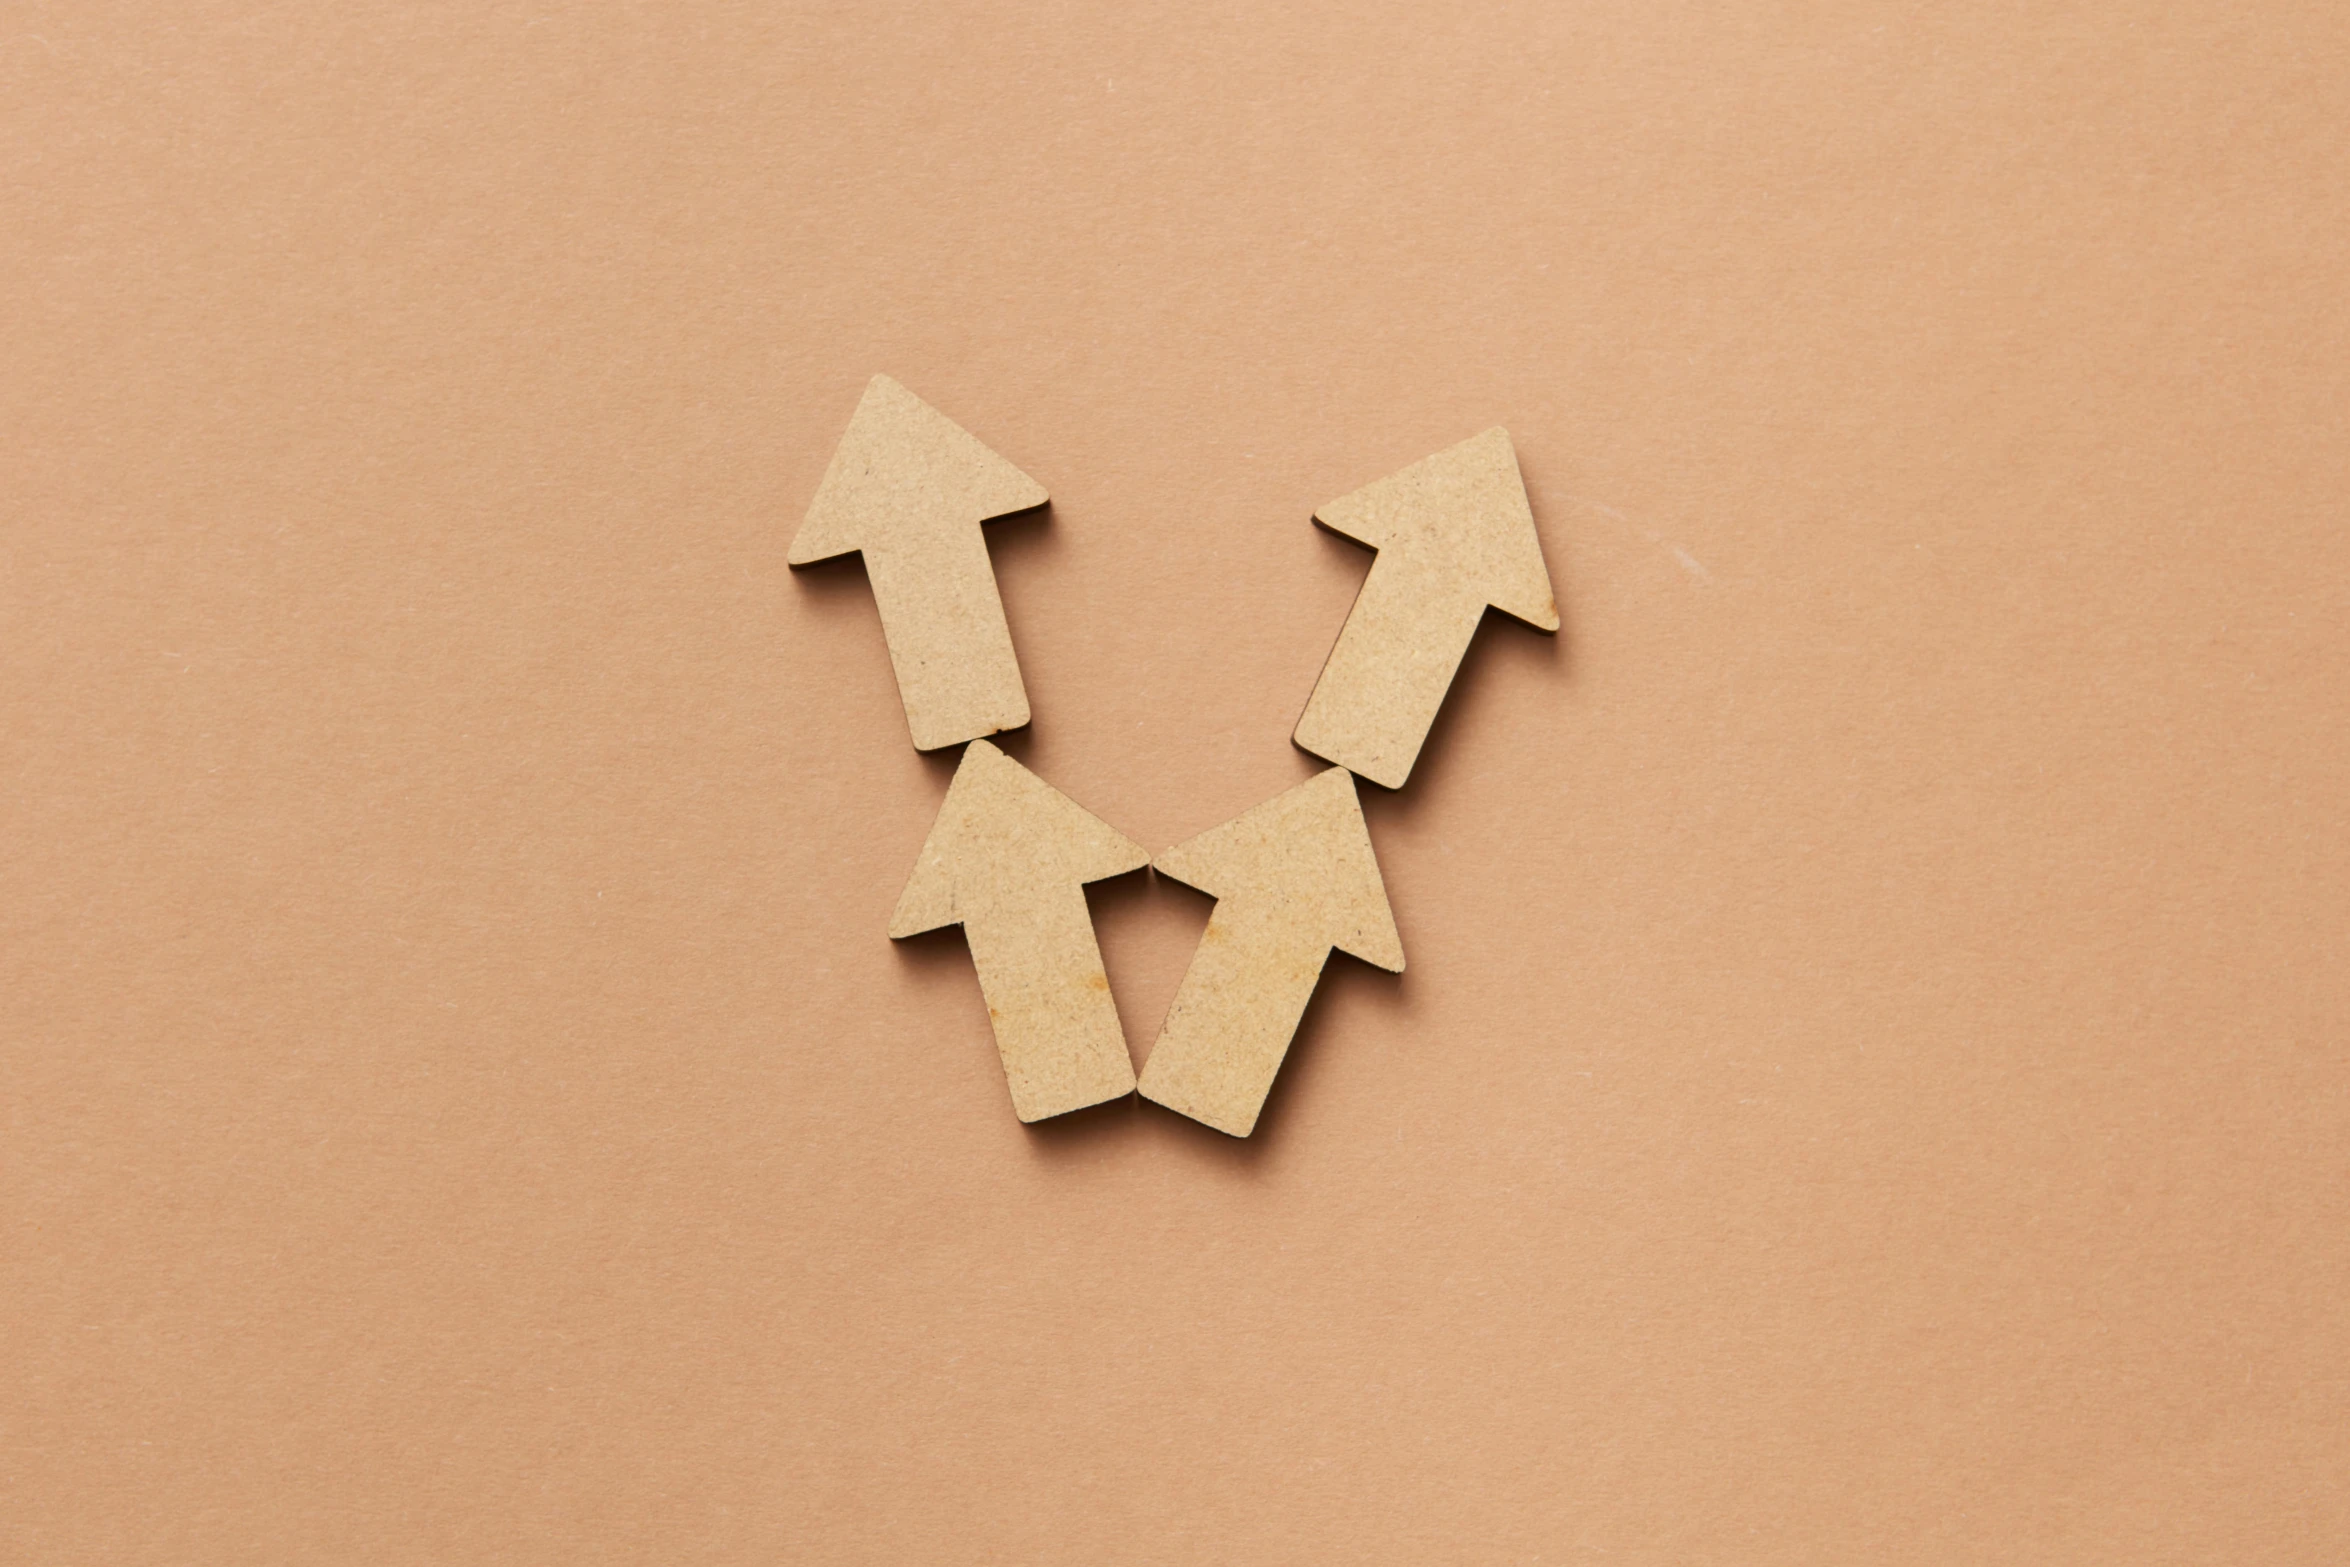 three wooden arrows pointing in opposite directions on a brown background, an album cover, by Attila Meszlenyi, trending on pexels, visual art, made of cardboard, inflateble shapes, cutie mark, taupe